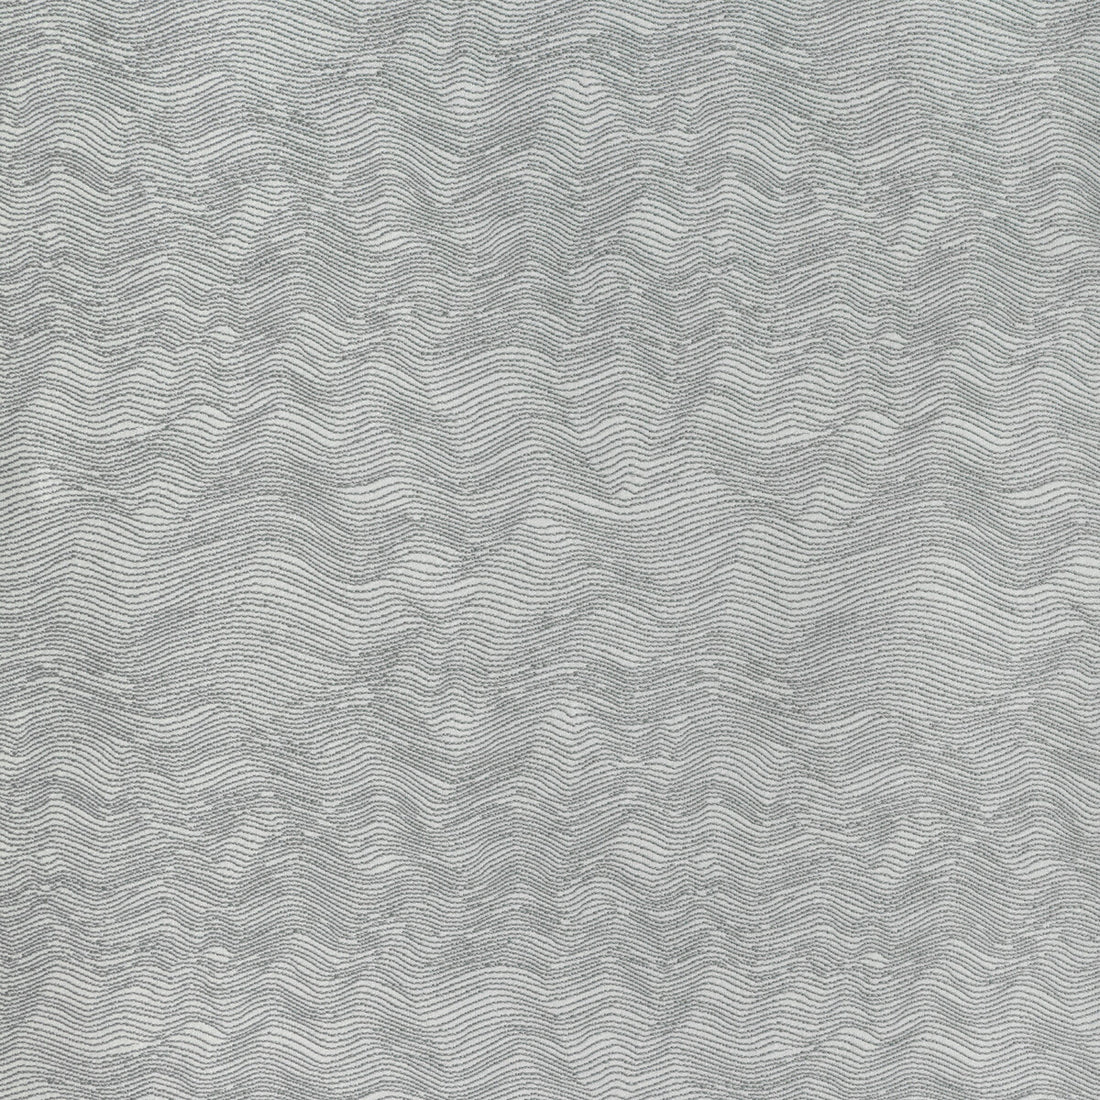 Watery Motion fabric in gull color - pattern 37056.11.0 - by Kravet Design in the Thom Filicia Latitude collection